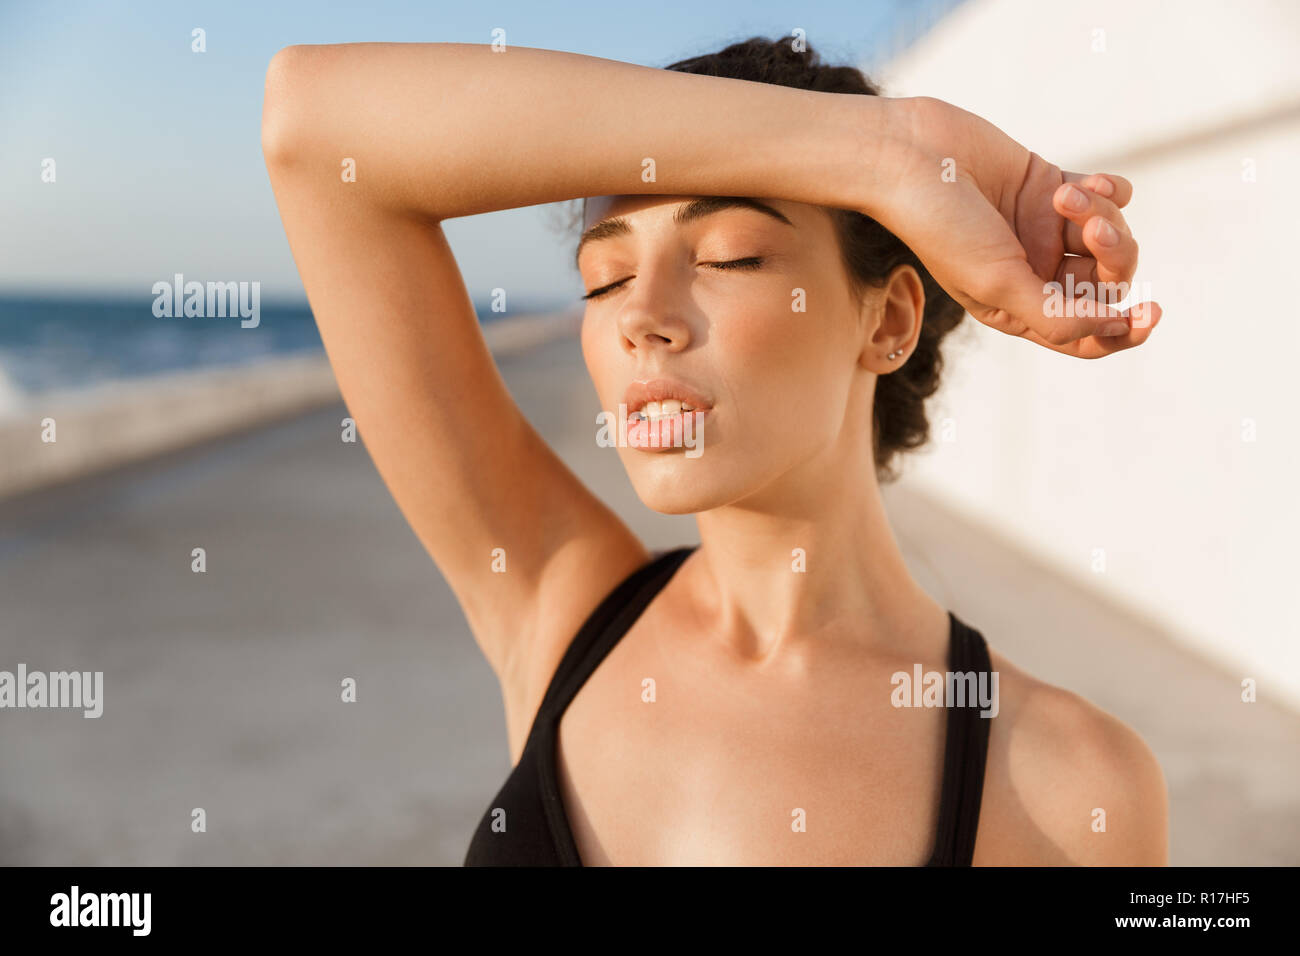 Tired young sportswoman standing outdoors, wiping forehead with hand Stock Photo